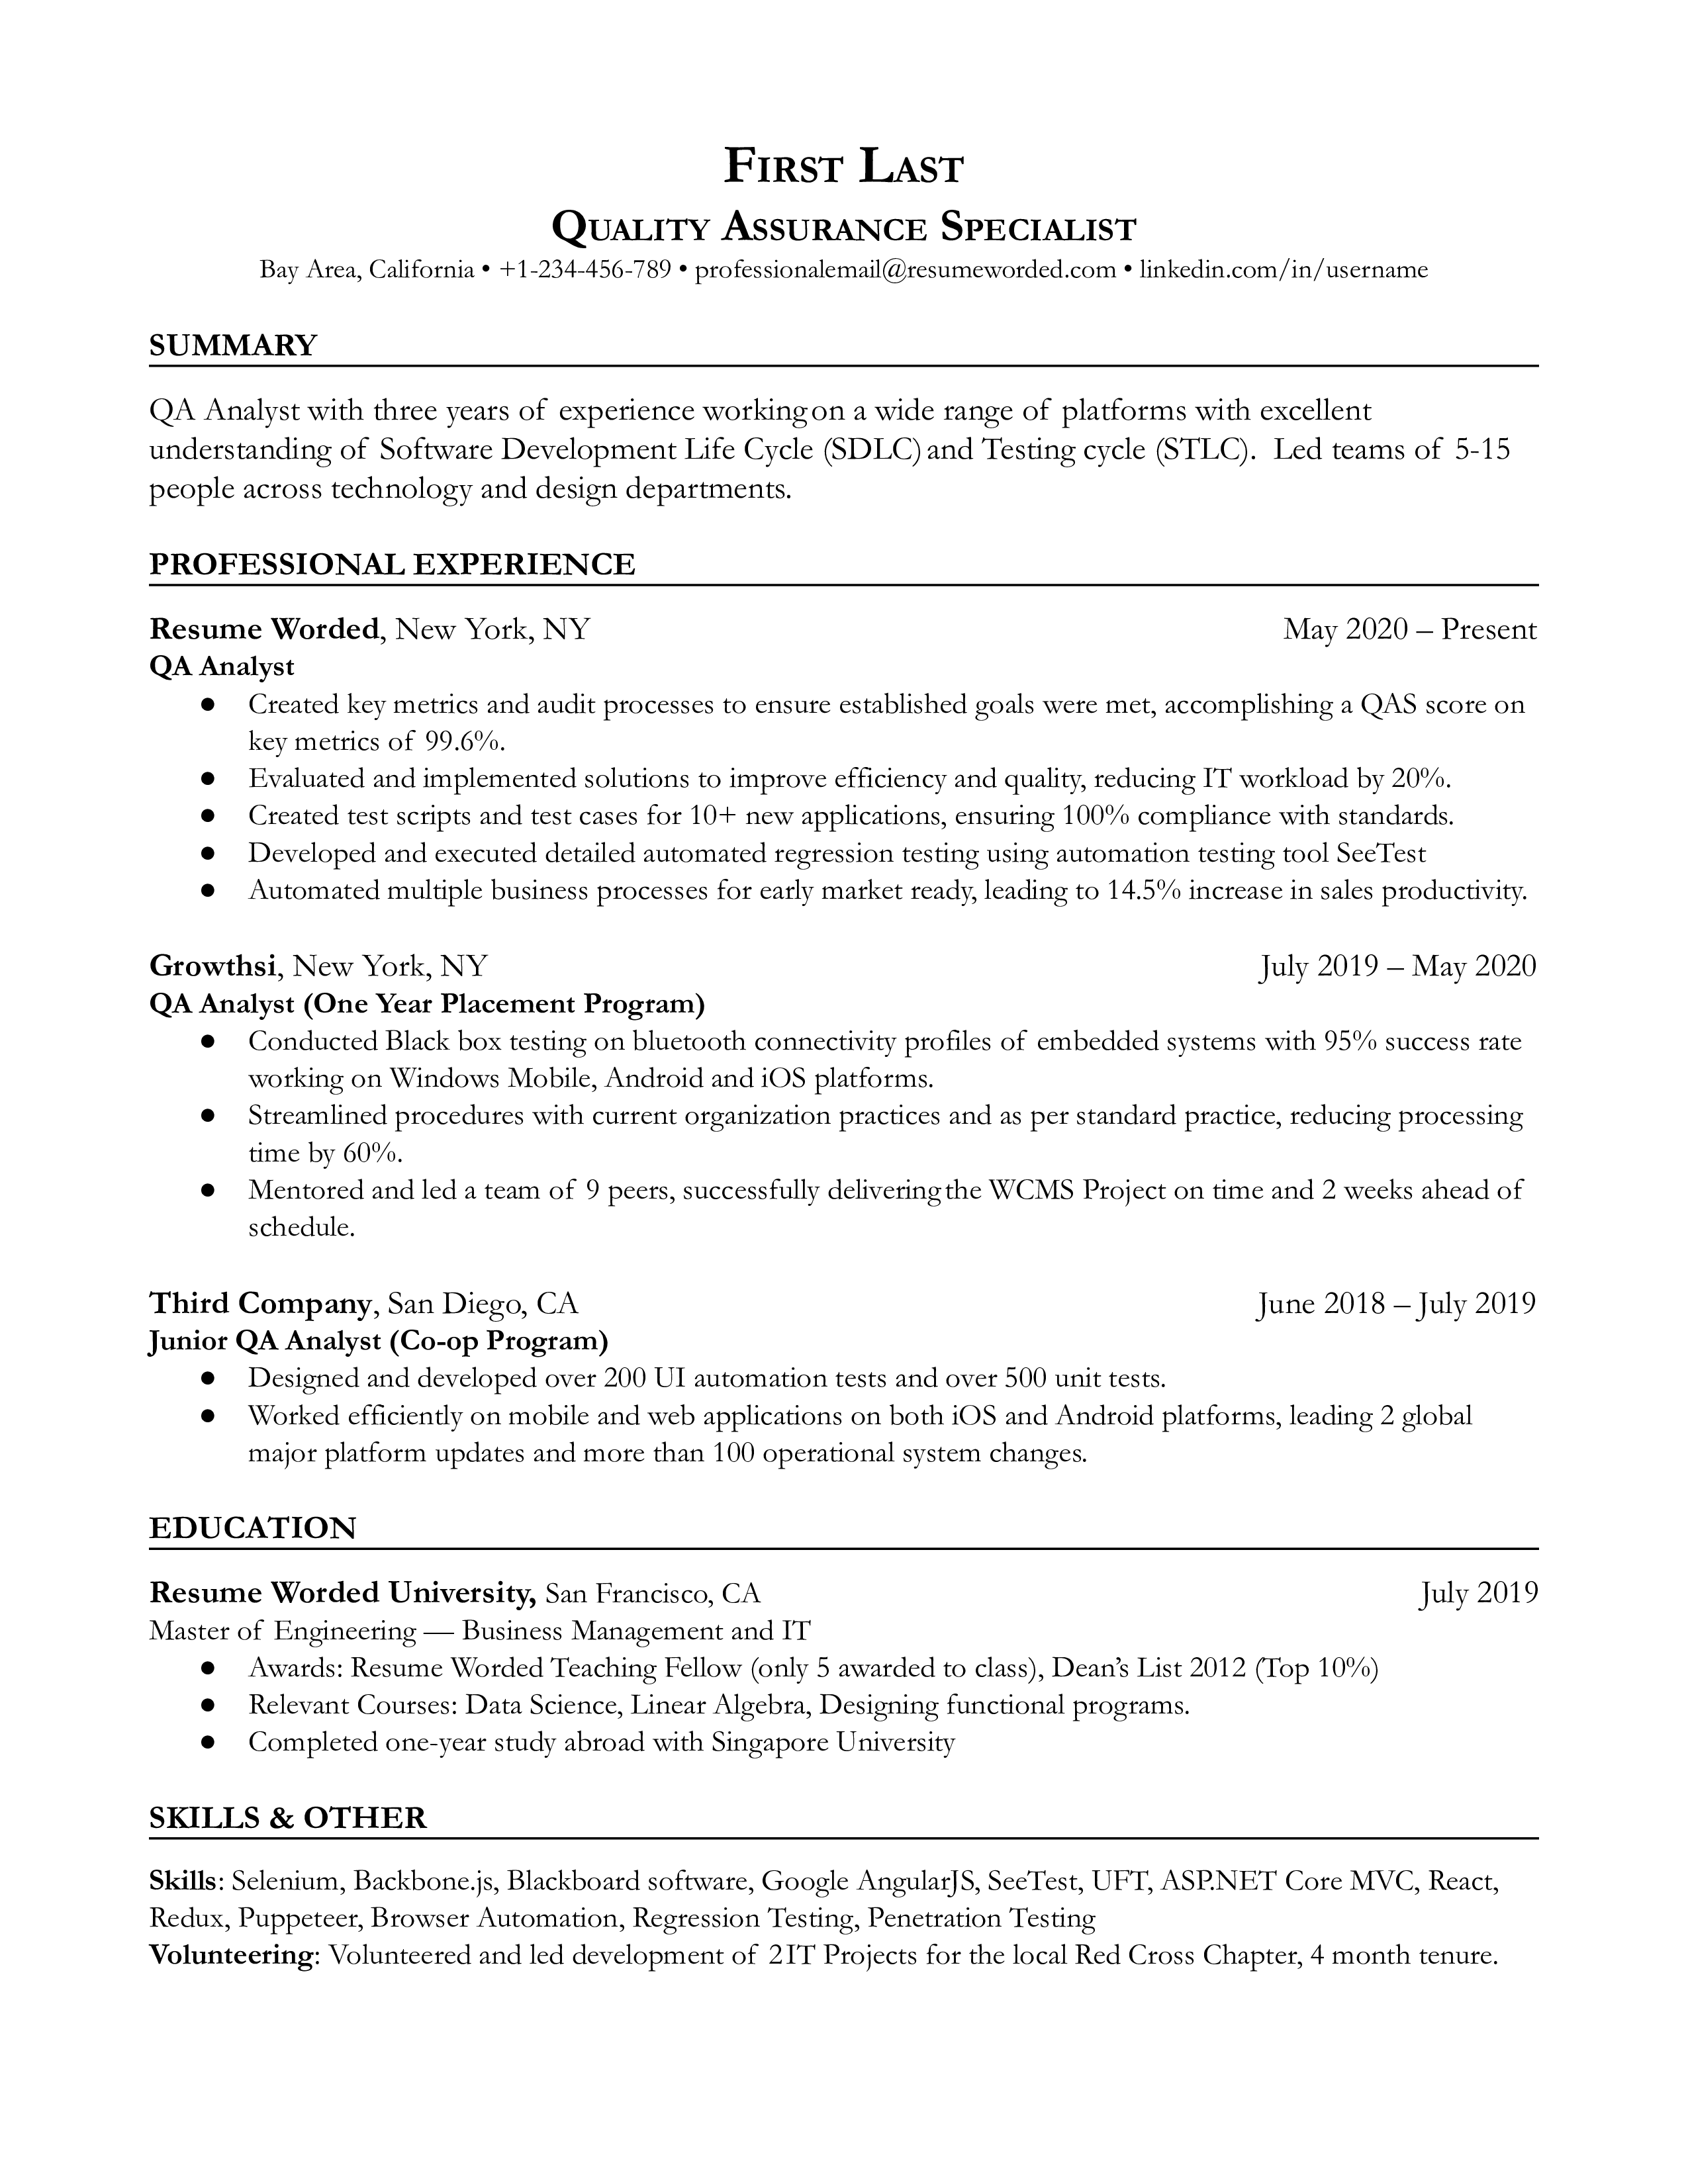 A sample QA Specialist resume that shows the way to tailor your intermediate-level QA skill set into a general and managerial path, as opposed to specializing as a QA tester.